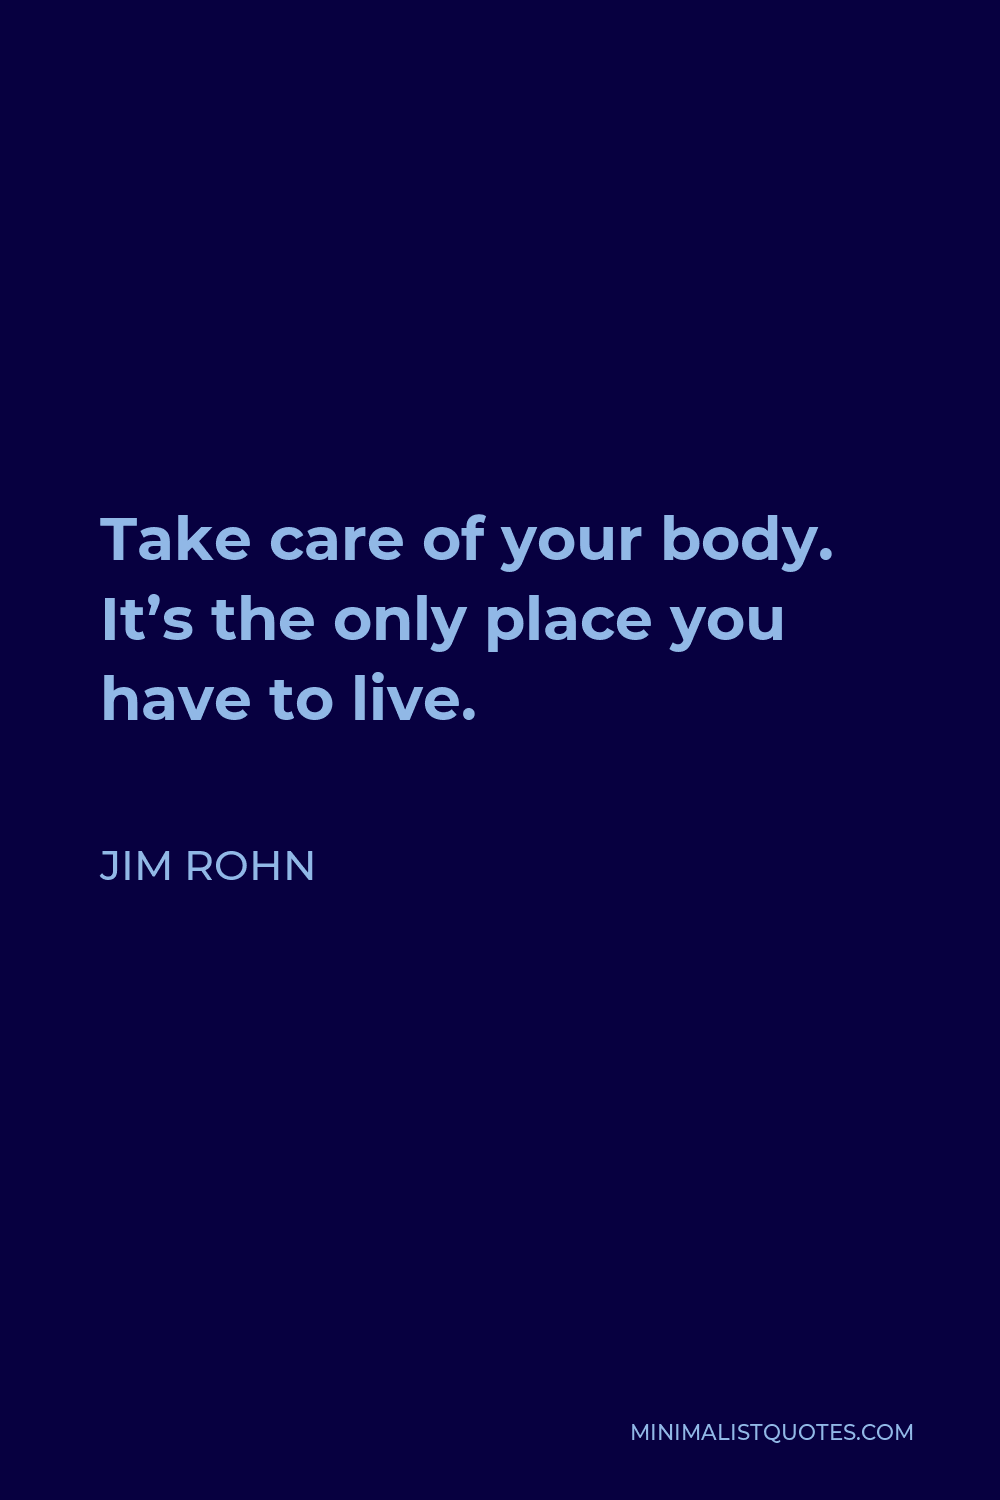 Jim Rohn Quote - Take care of your body. It’s the only place you have to live.